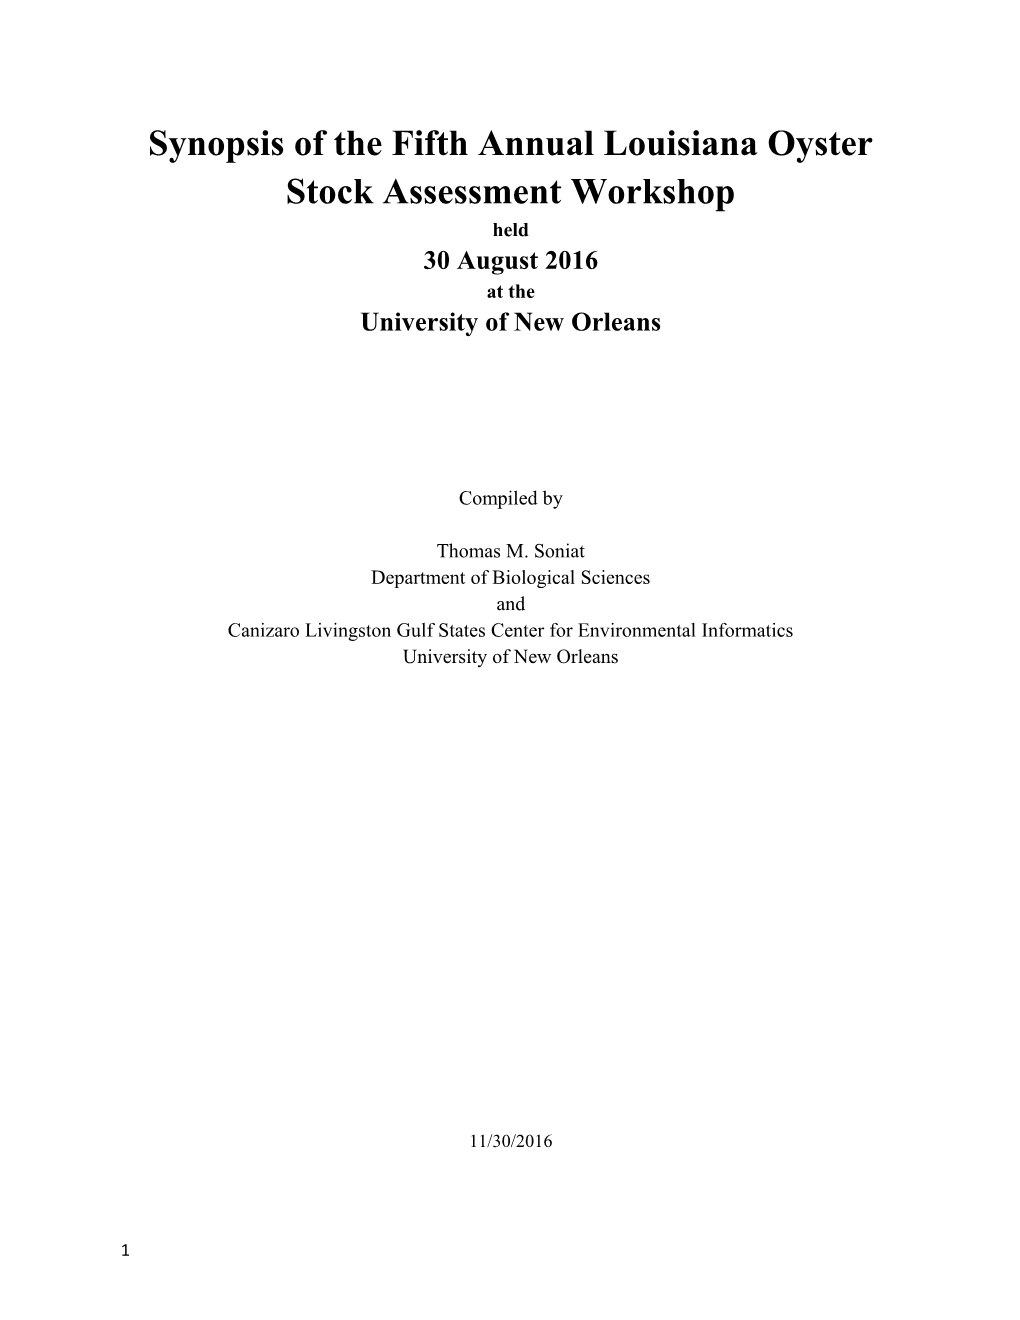 Synopsis of the Fifth Annual Louisiana Oyster Stock Assessment Workshop